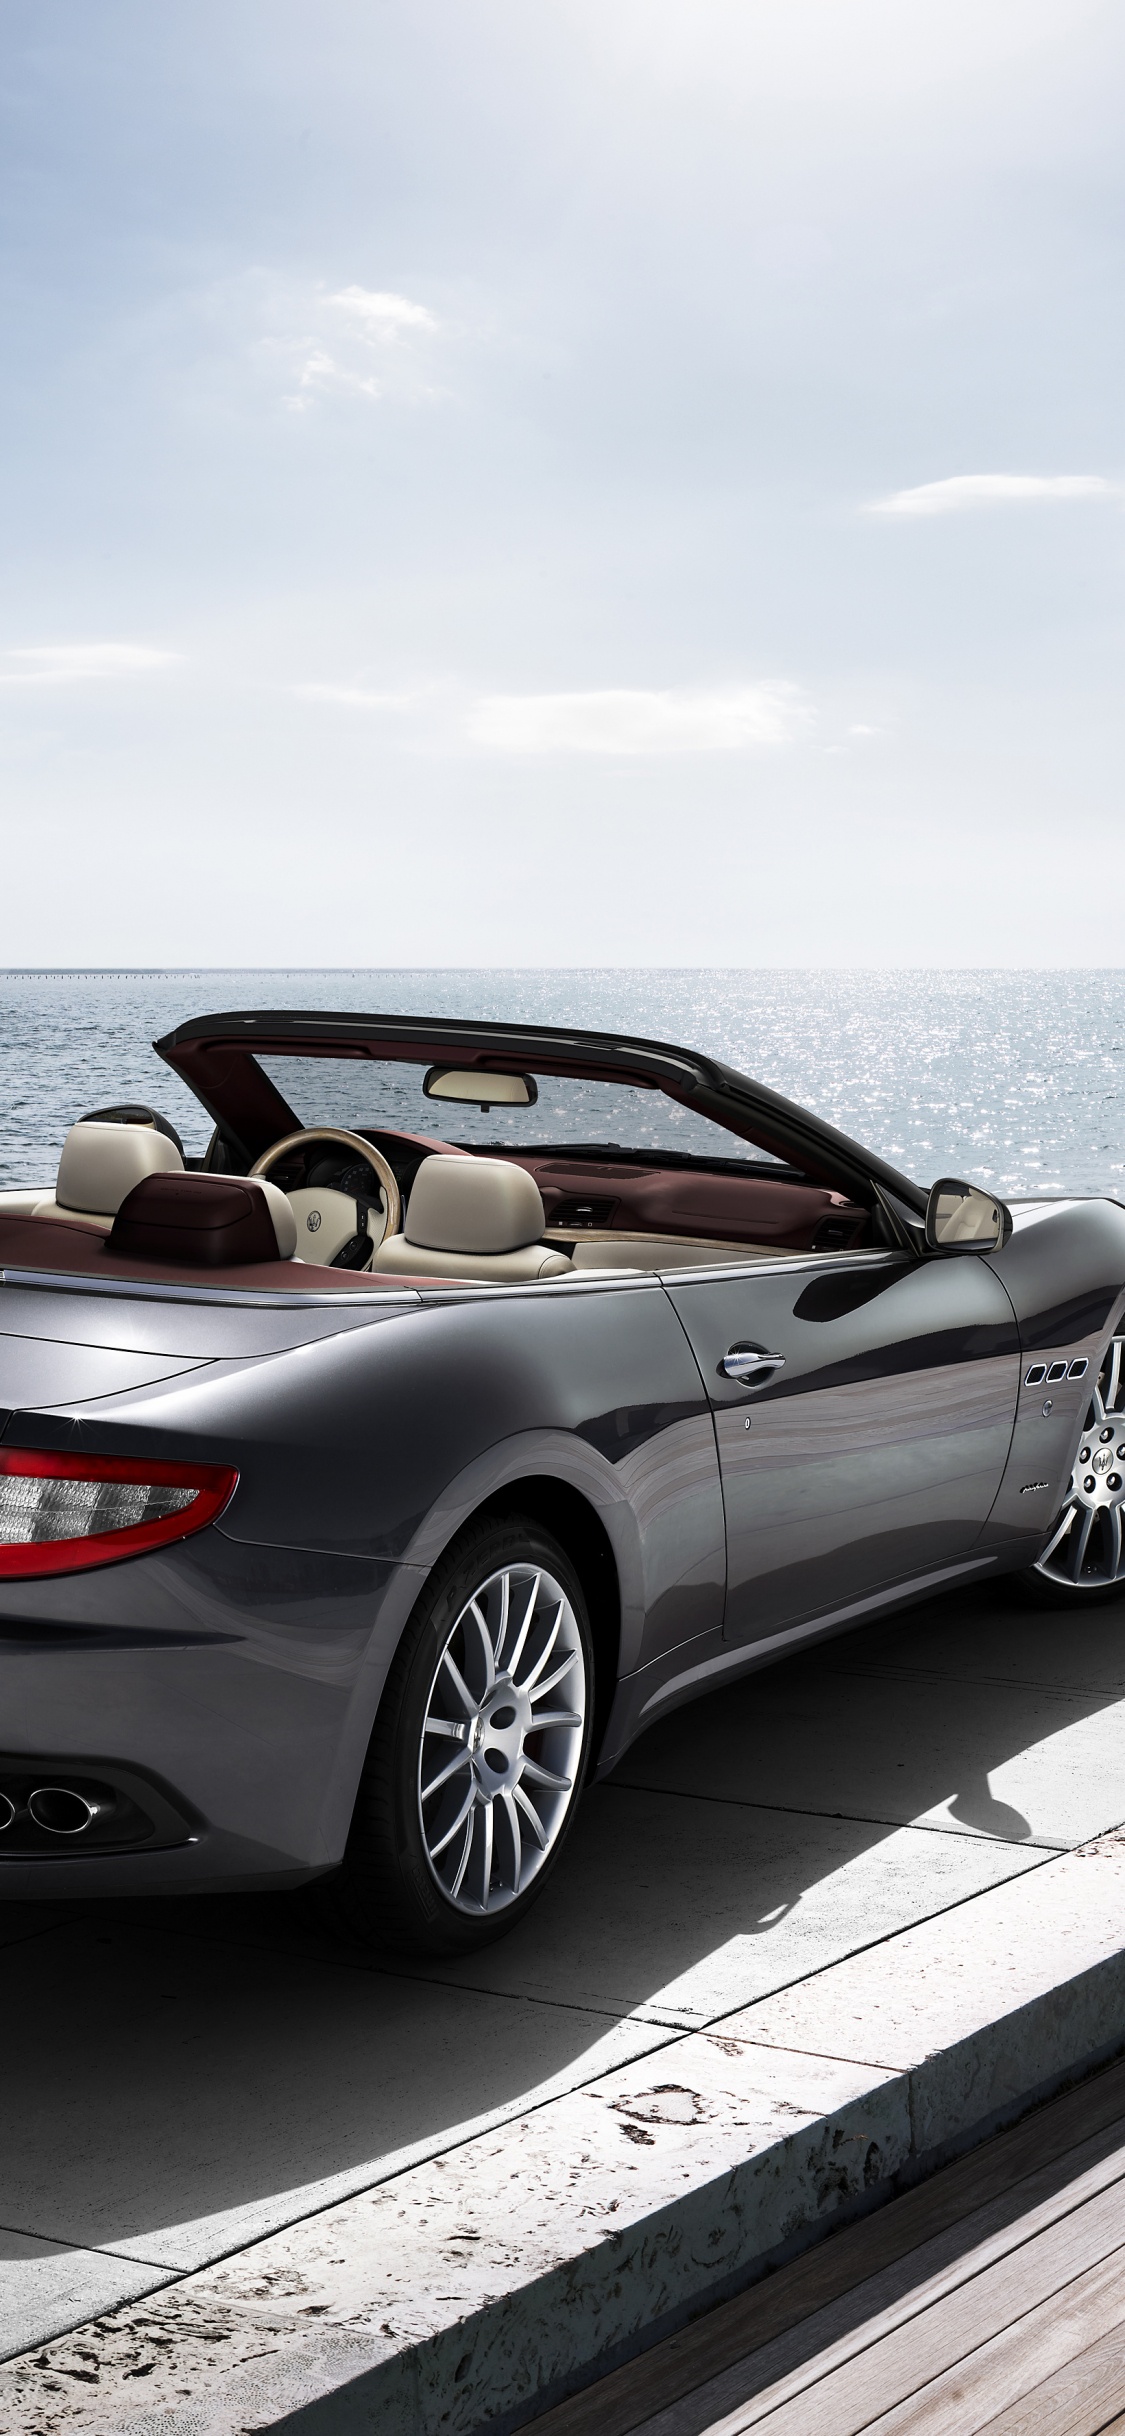 Silver Mercedes Benz Convertible Coupe Parked on Dock During Daytime. Wallpaper in 1125x2436 Resolution